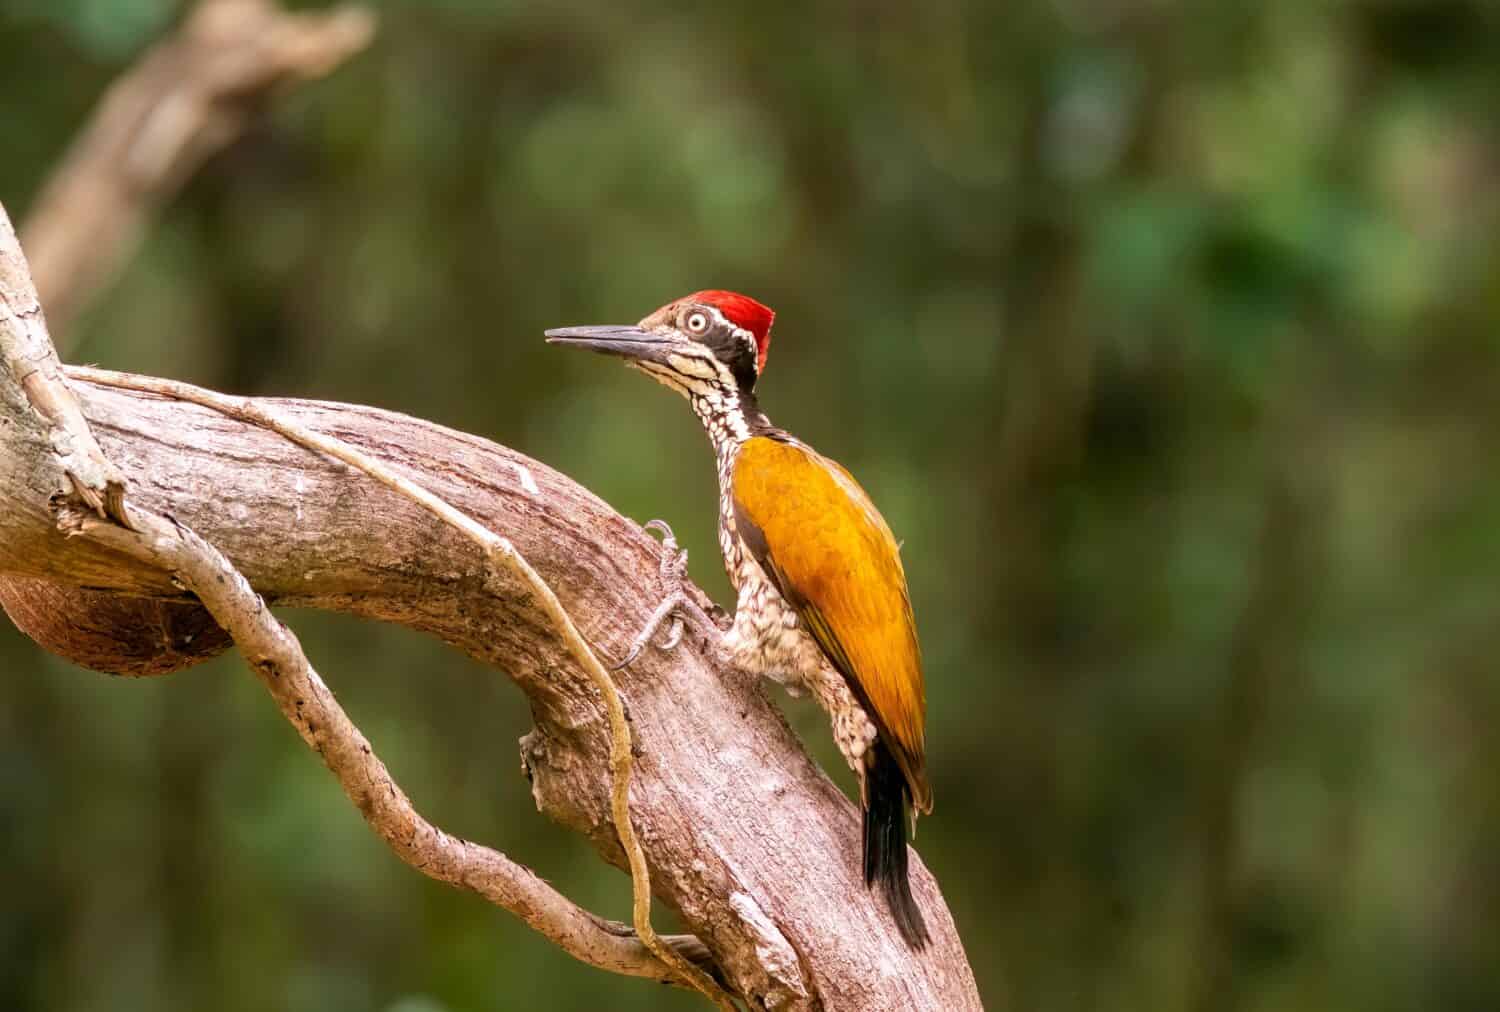 A greater flameback wood pecker perched on a tree branch on the deep jungles on the outskirts of Thattekad, Kerala